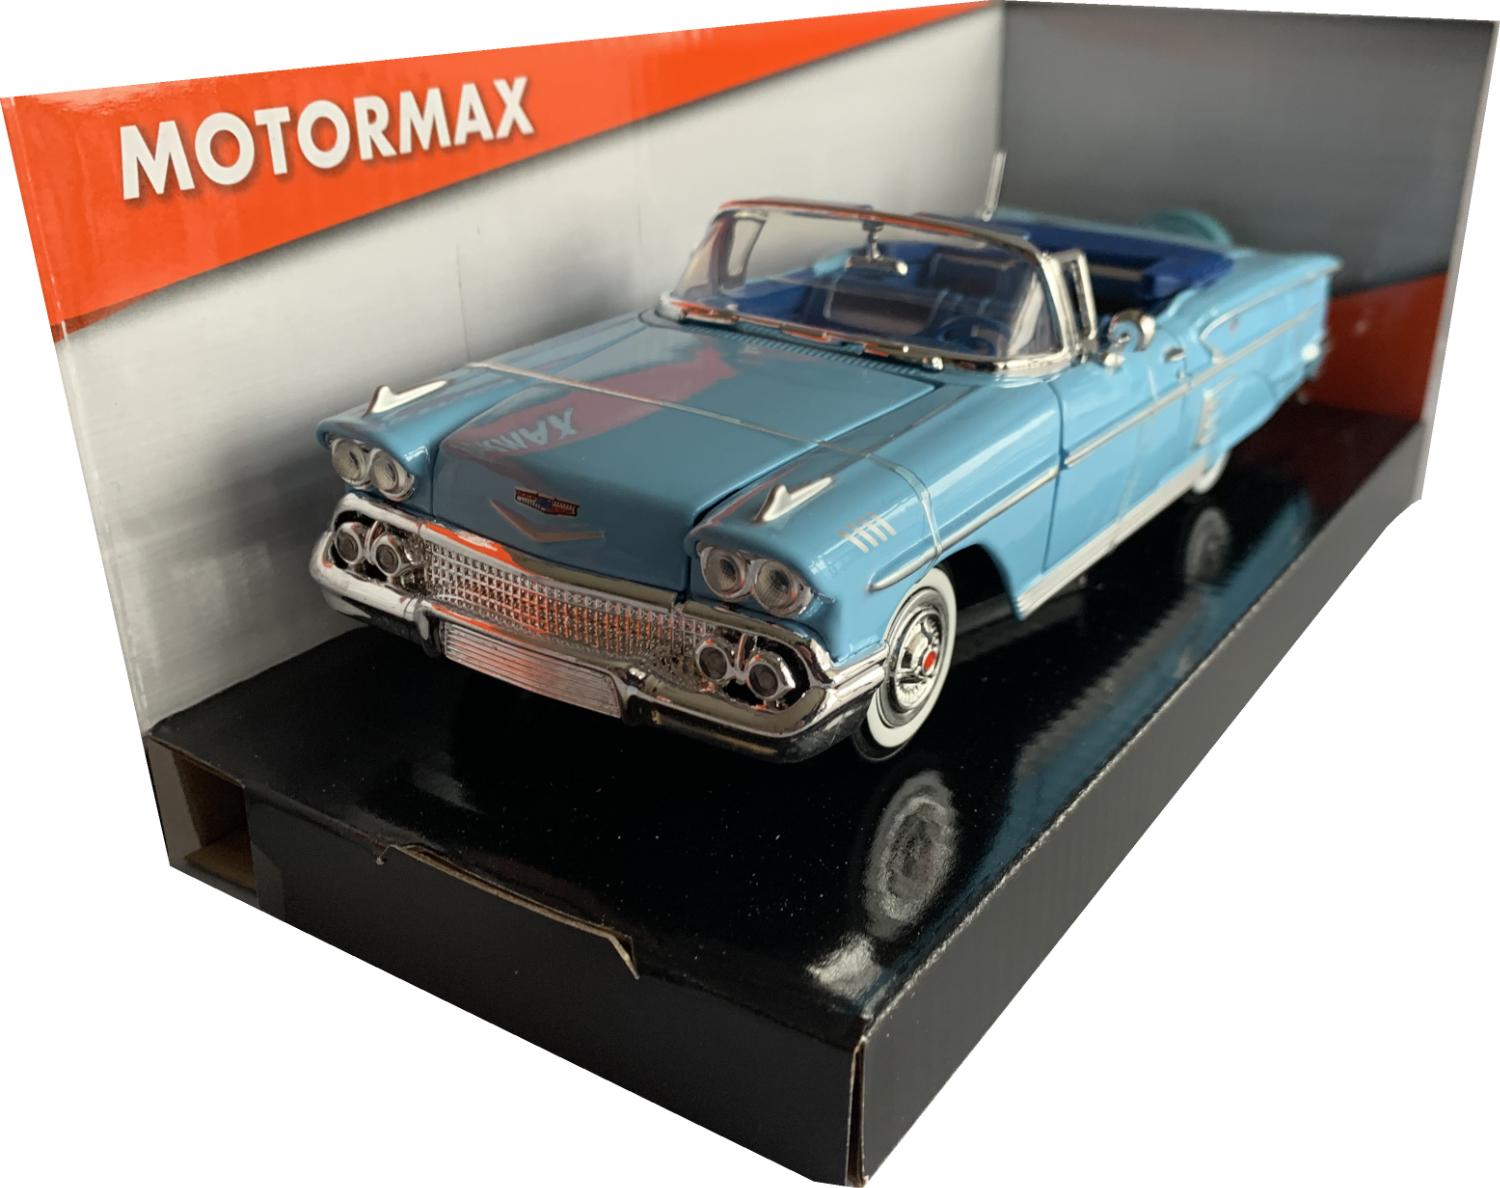 Chevrolet Impala Convertible 1958 in light blue 1:24 scale model from Motormax